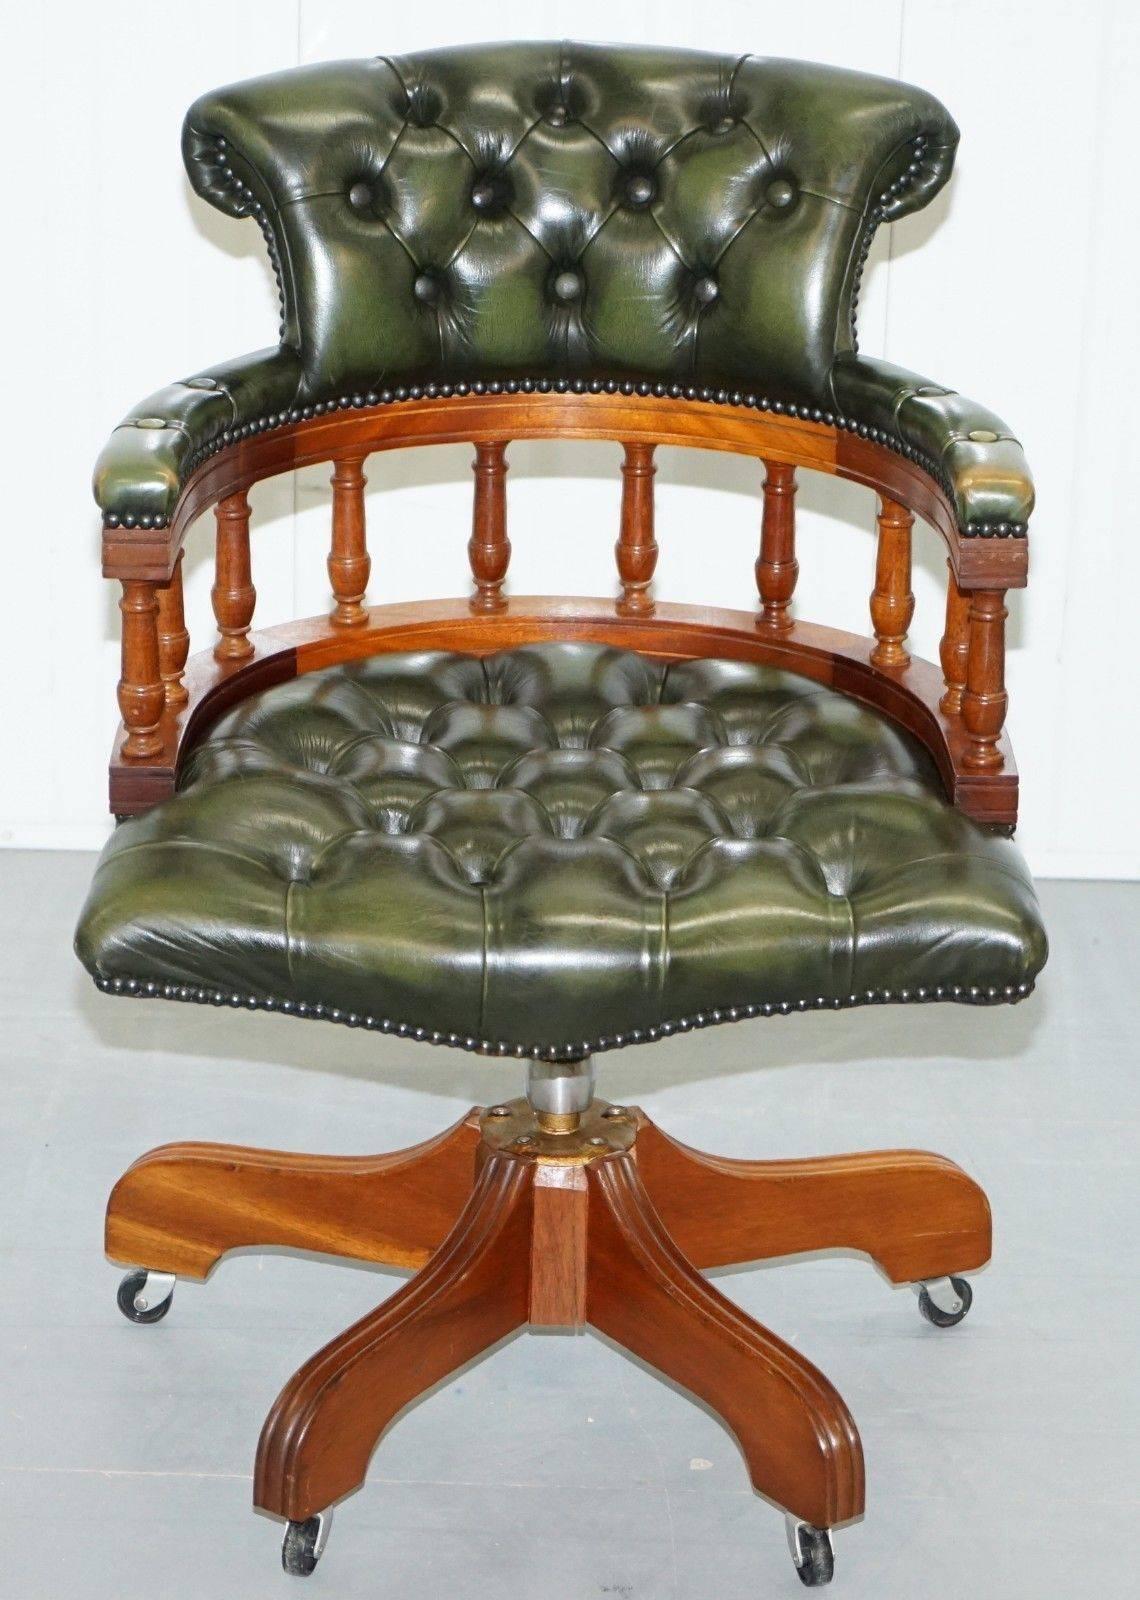 We are delighted to offer for sale this lovely aged green leather Chesterfield captains chair

A good looking well made and exceptionally comfortable captains chair, the leather has a nice worn vintage patina to it, we have deep cleaned hand